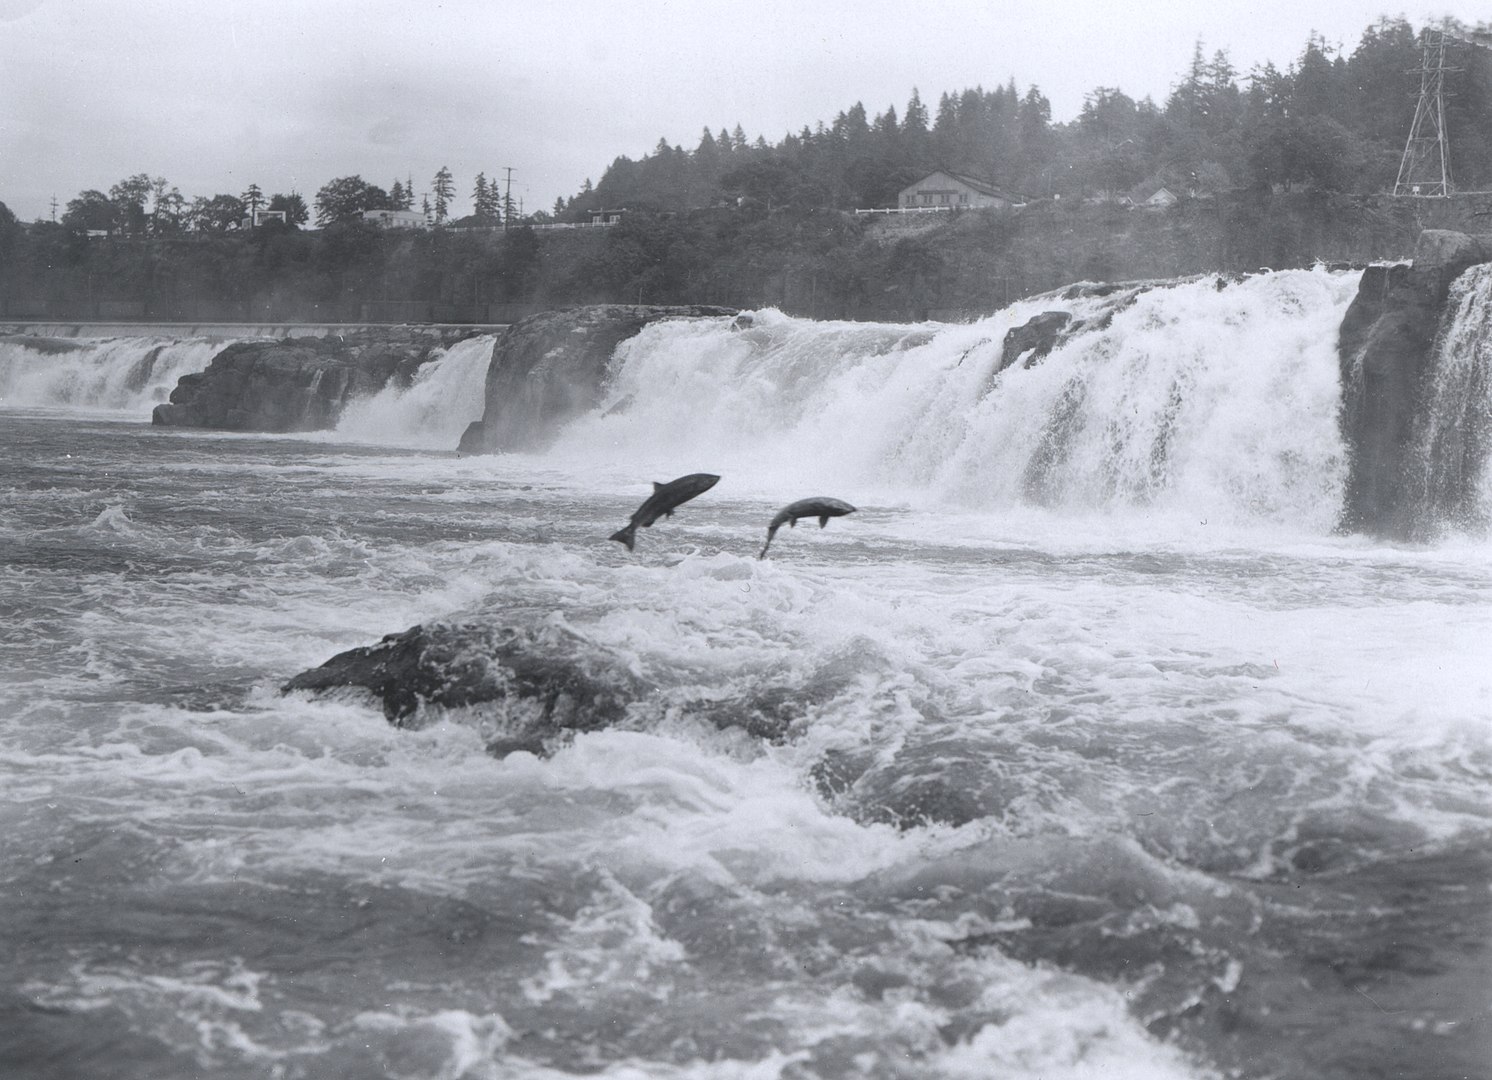 Images/Fishinginthecity/SAC/CAEP/1492px-Salmon_leaping_at_Willamette_Falls.jpg